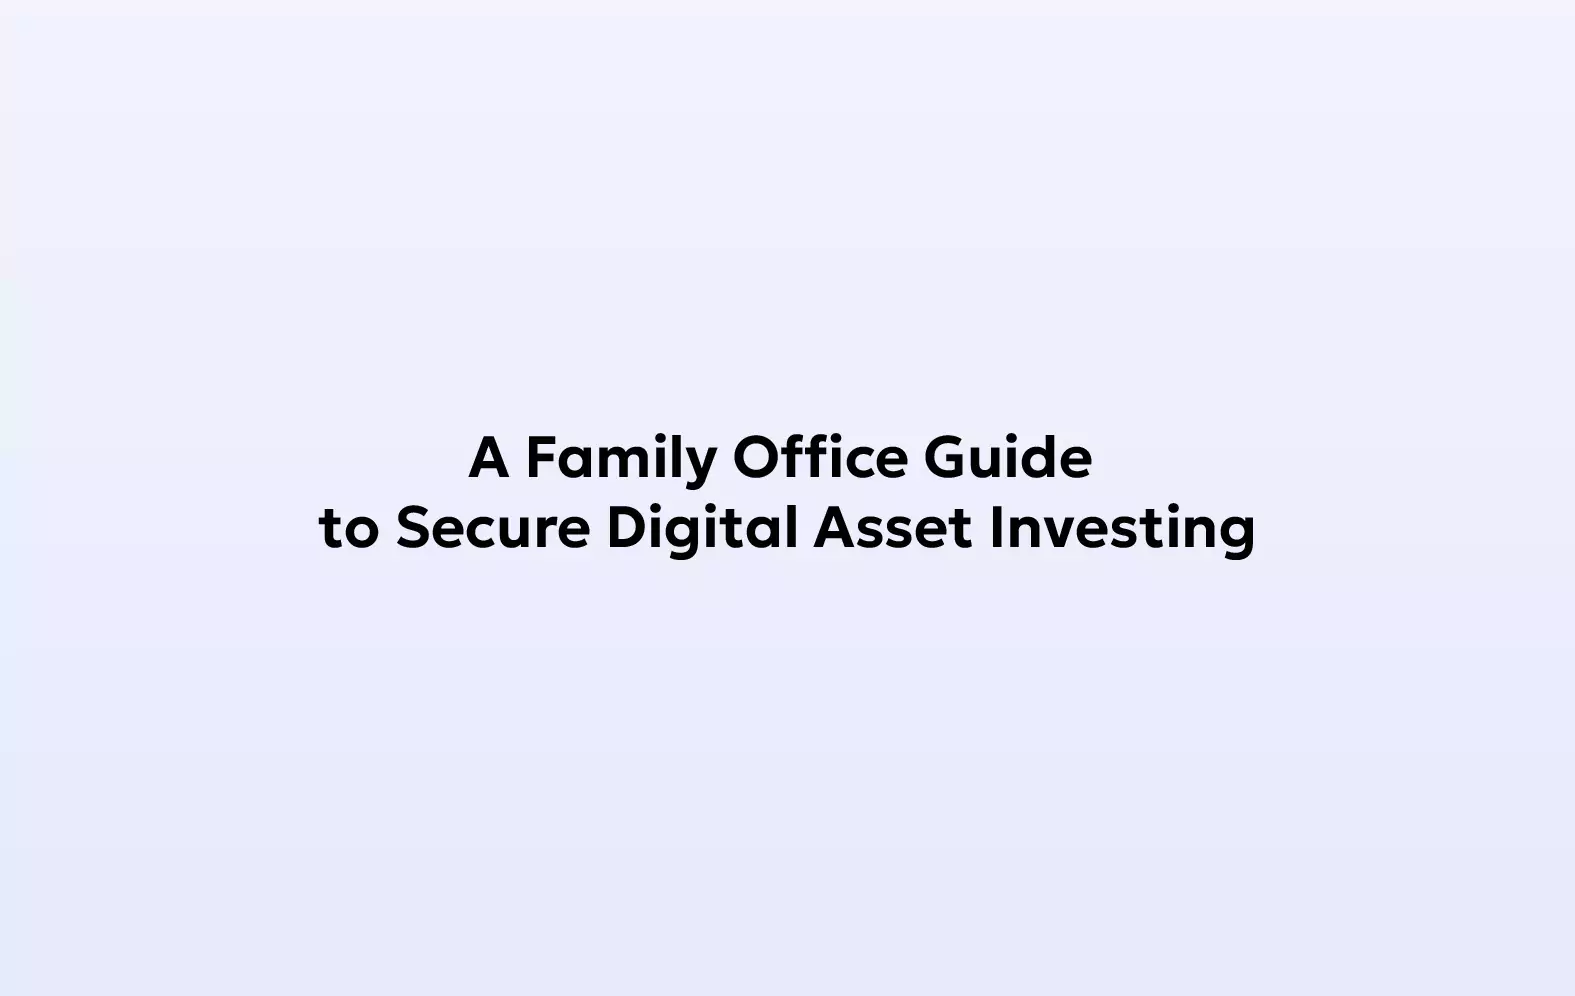 A Family Office Guide To Secure Digital Asset Investing